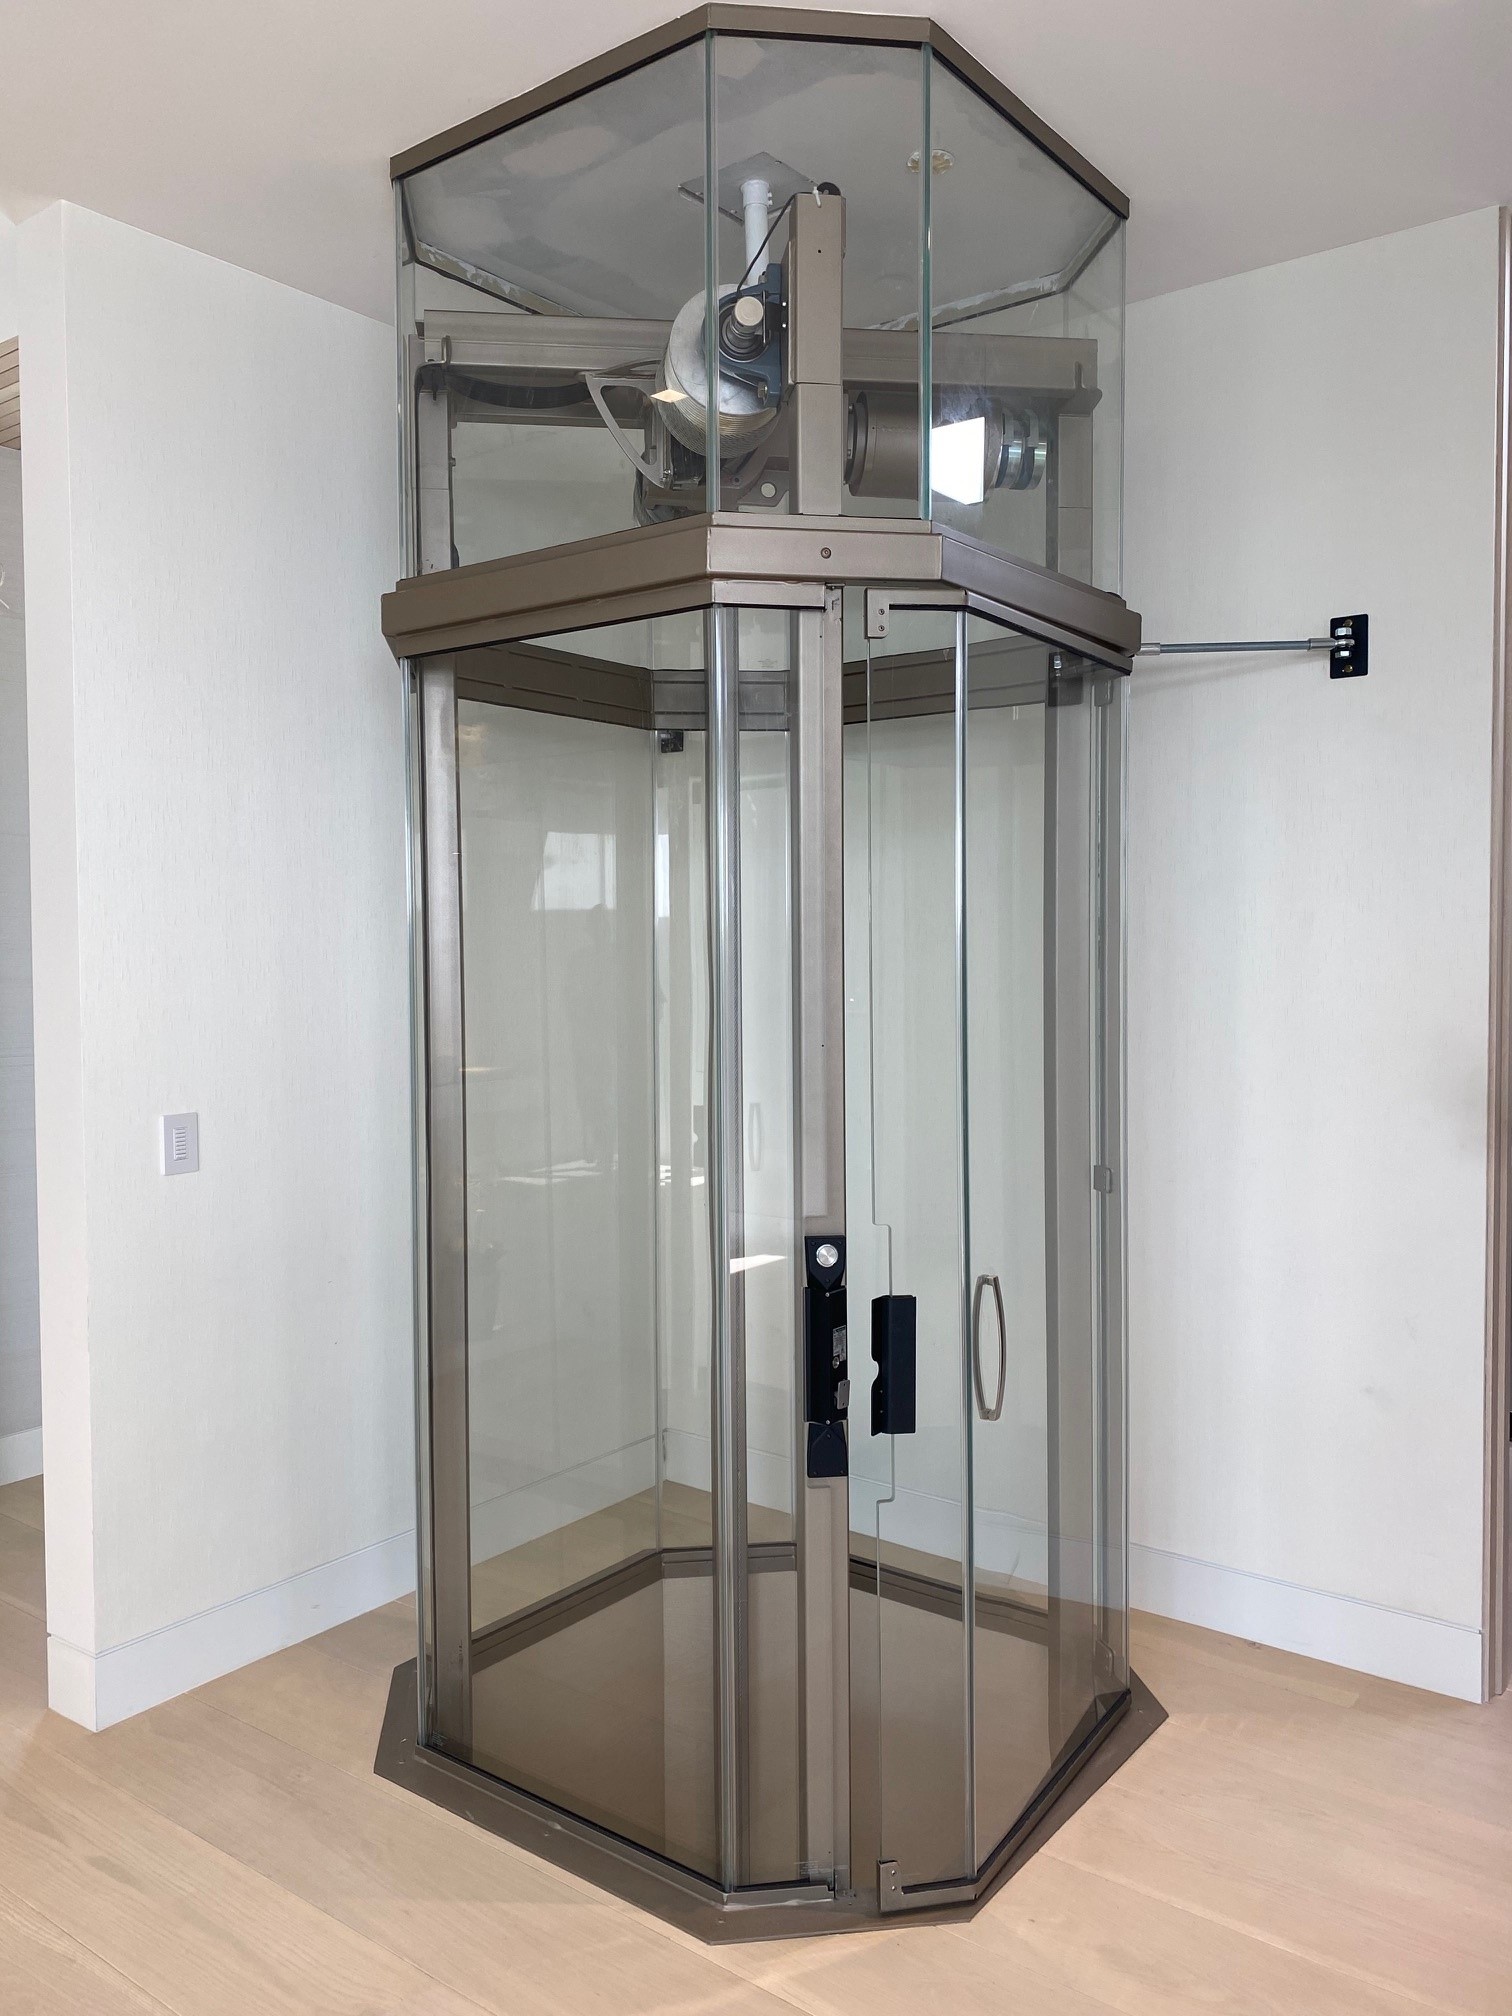 Savaria Vuelift installed by Diamond Home Elevator in California